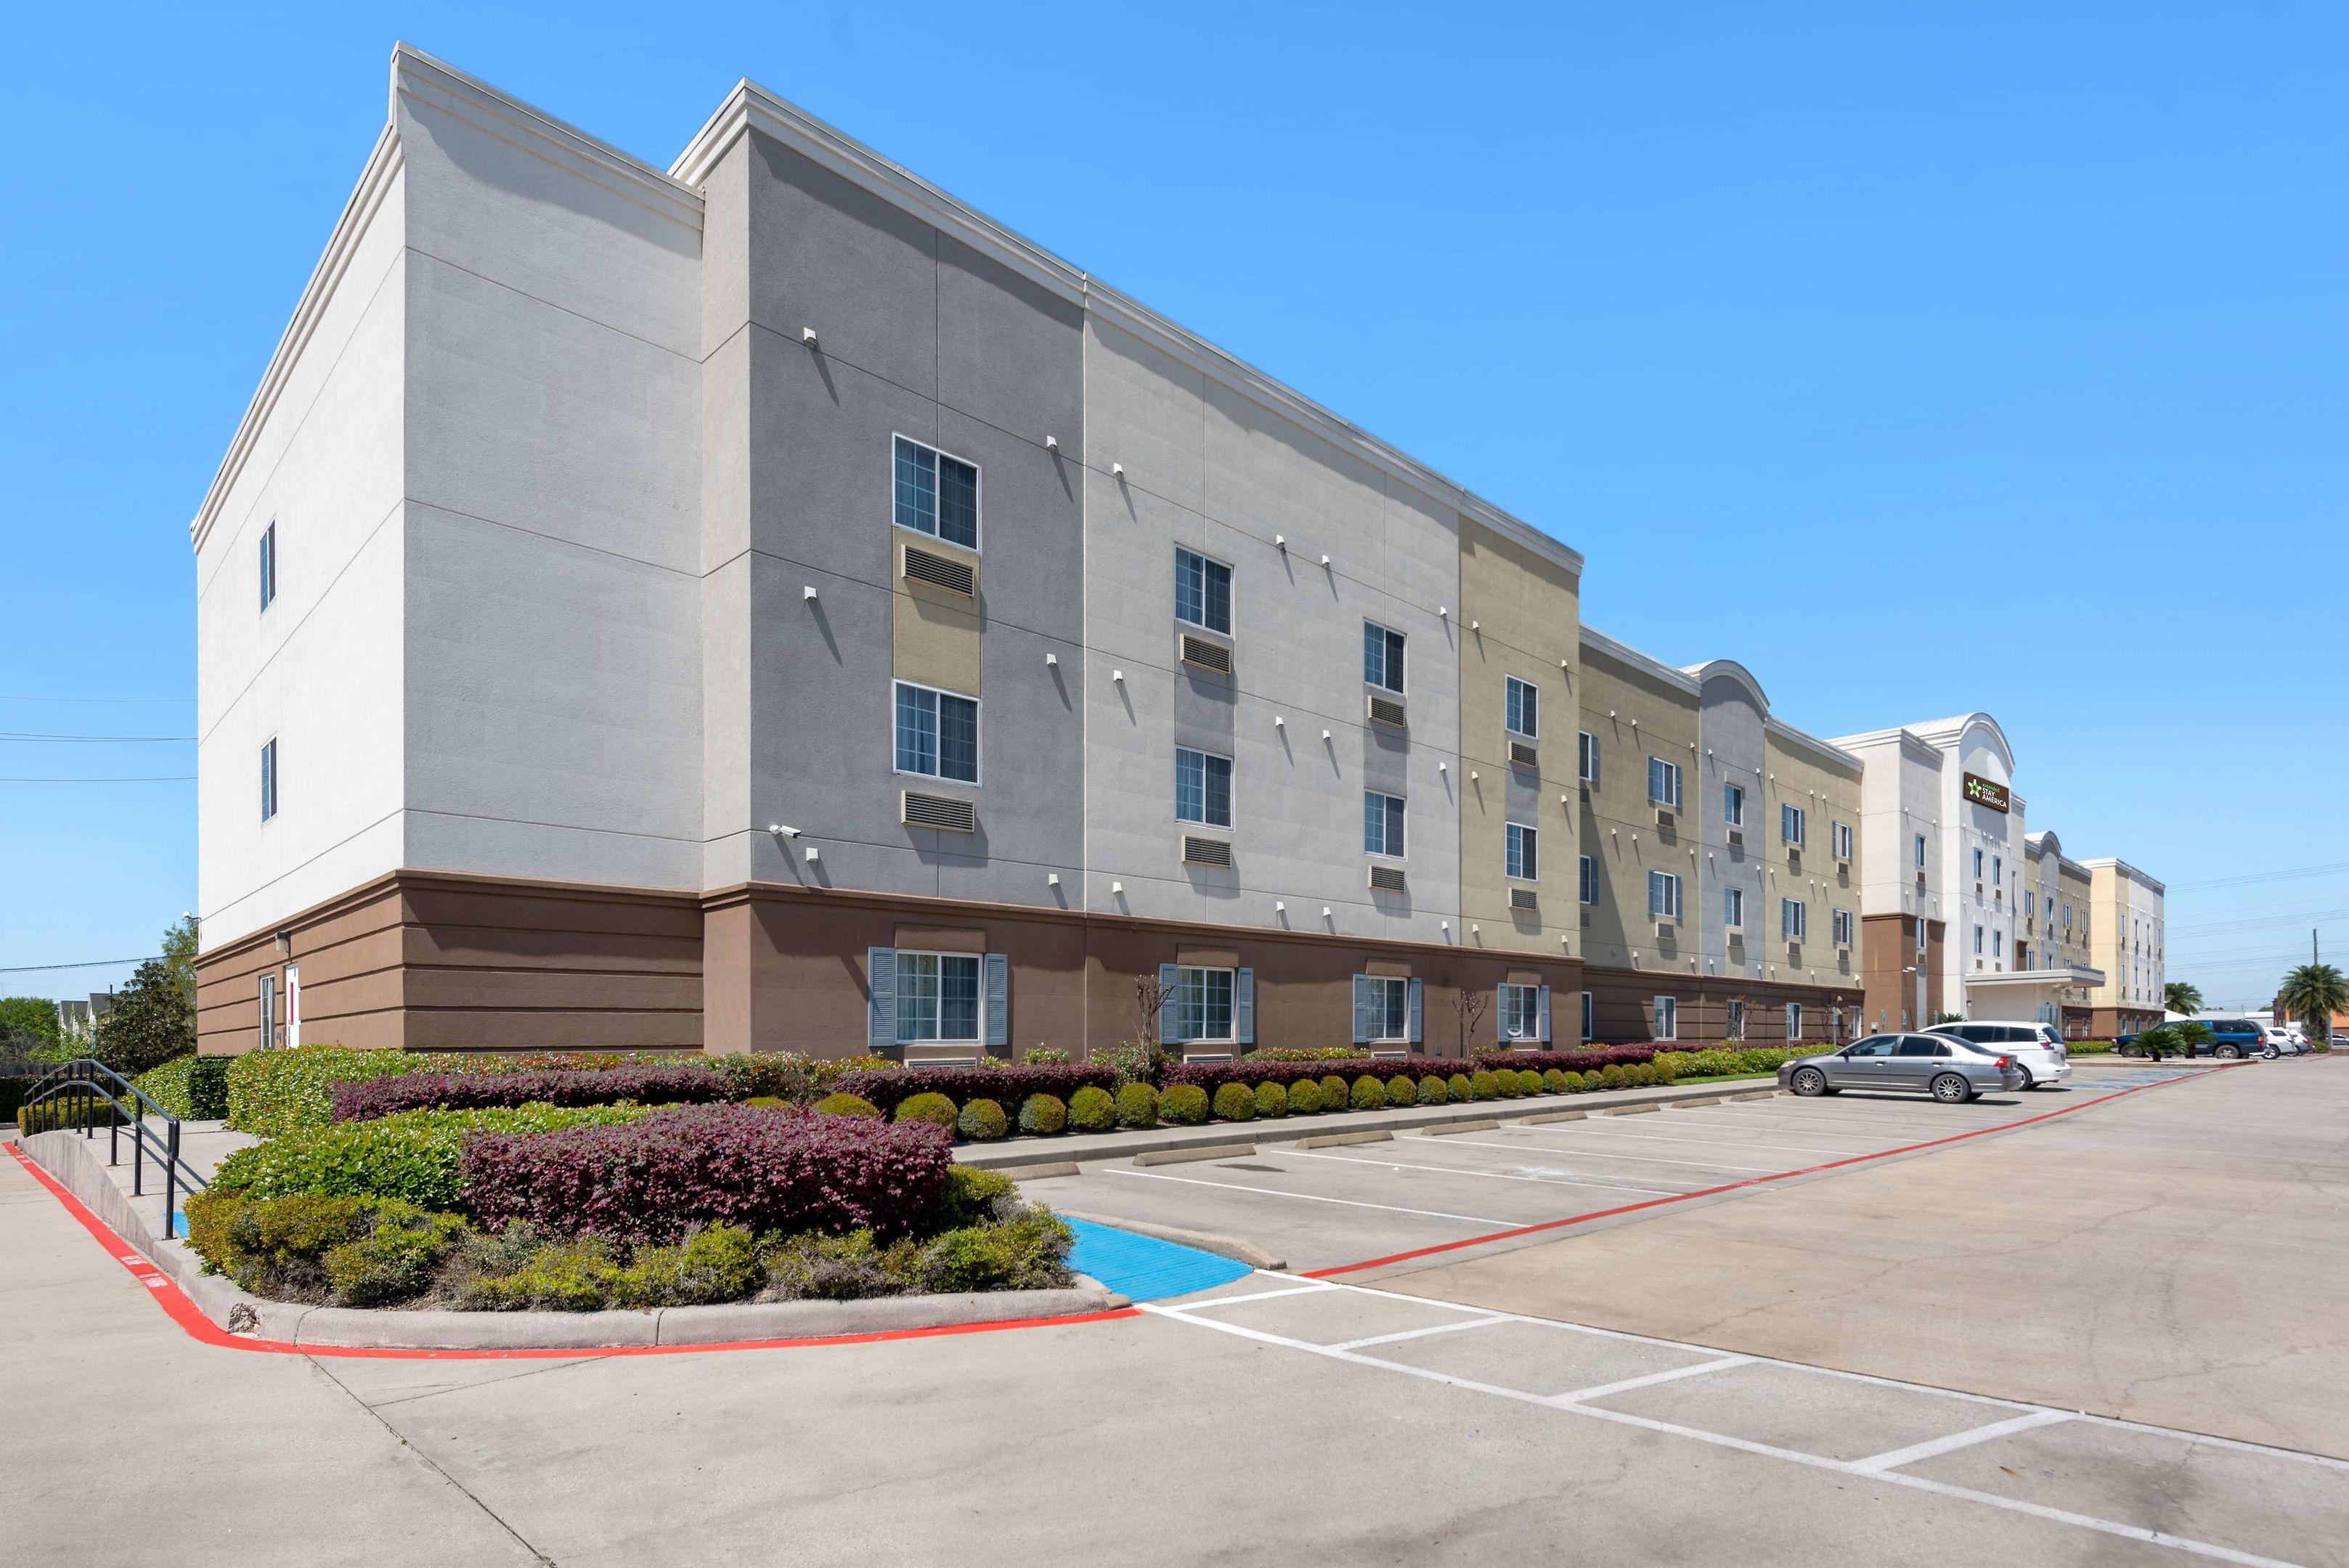 Extended Stay America Lawton - Fort Sill